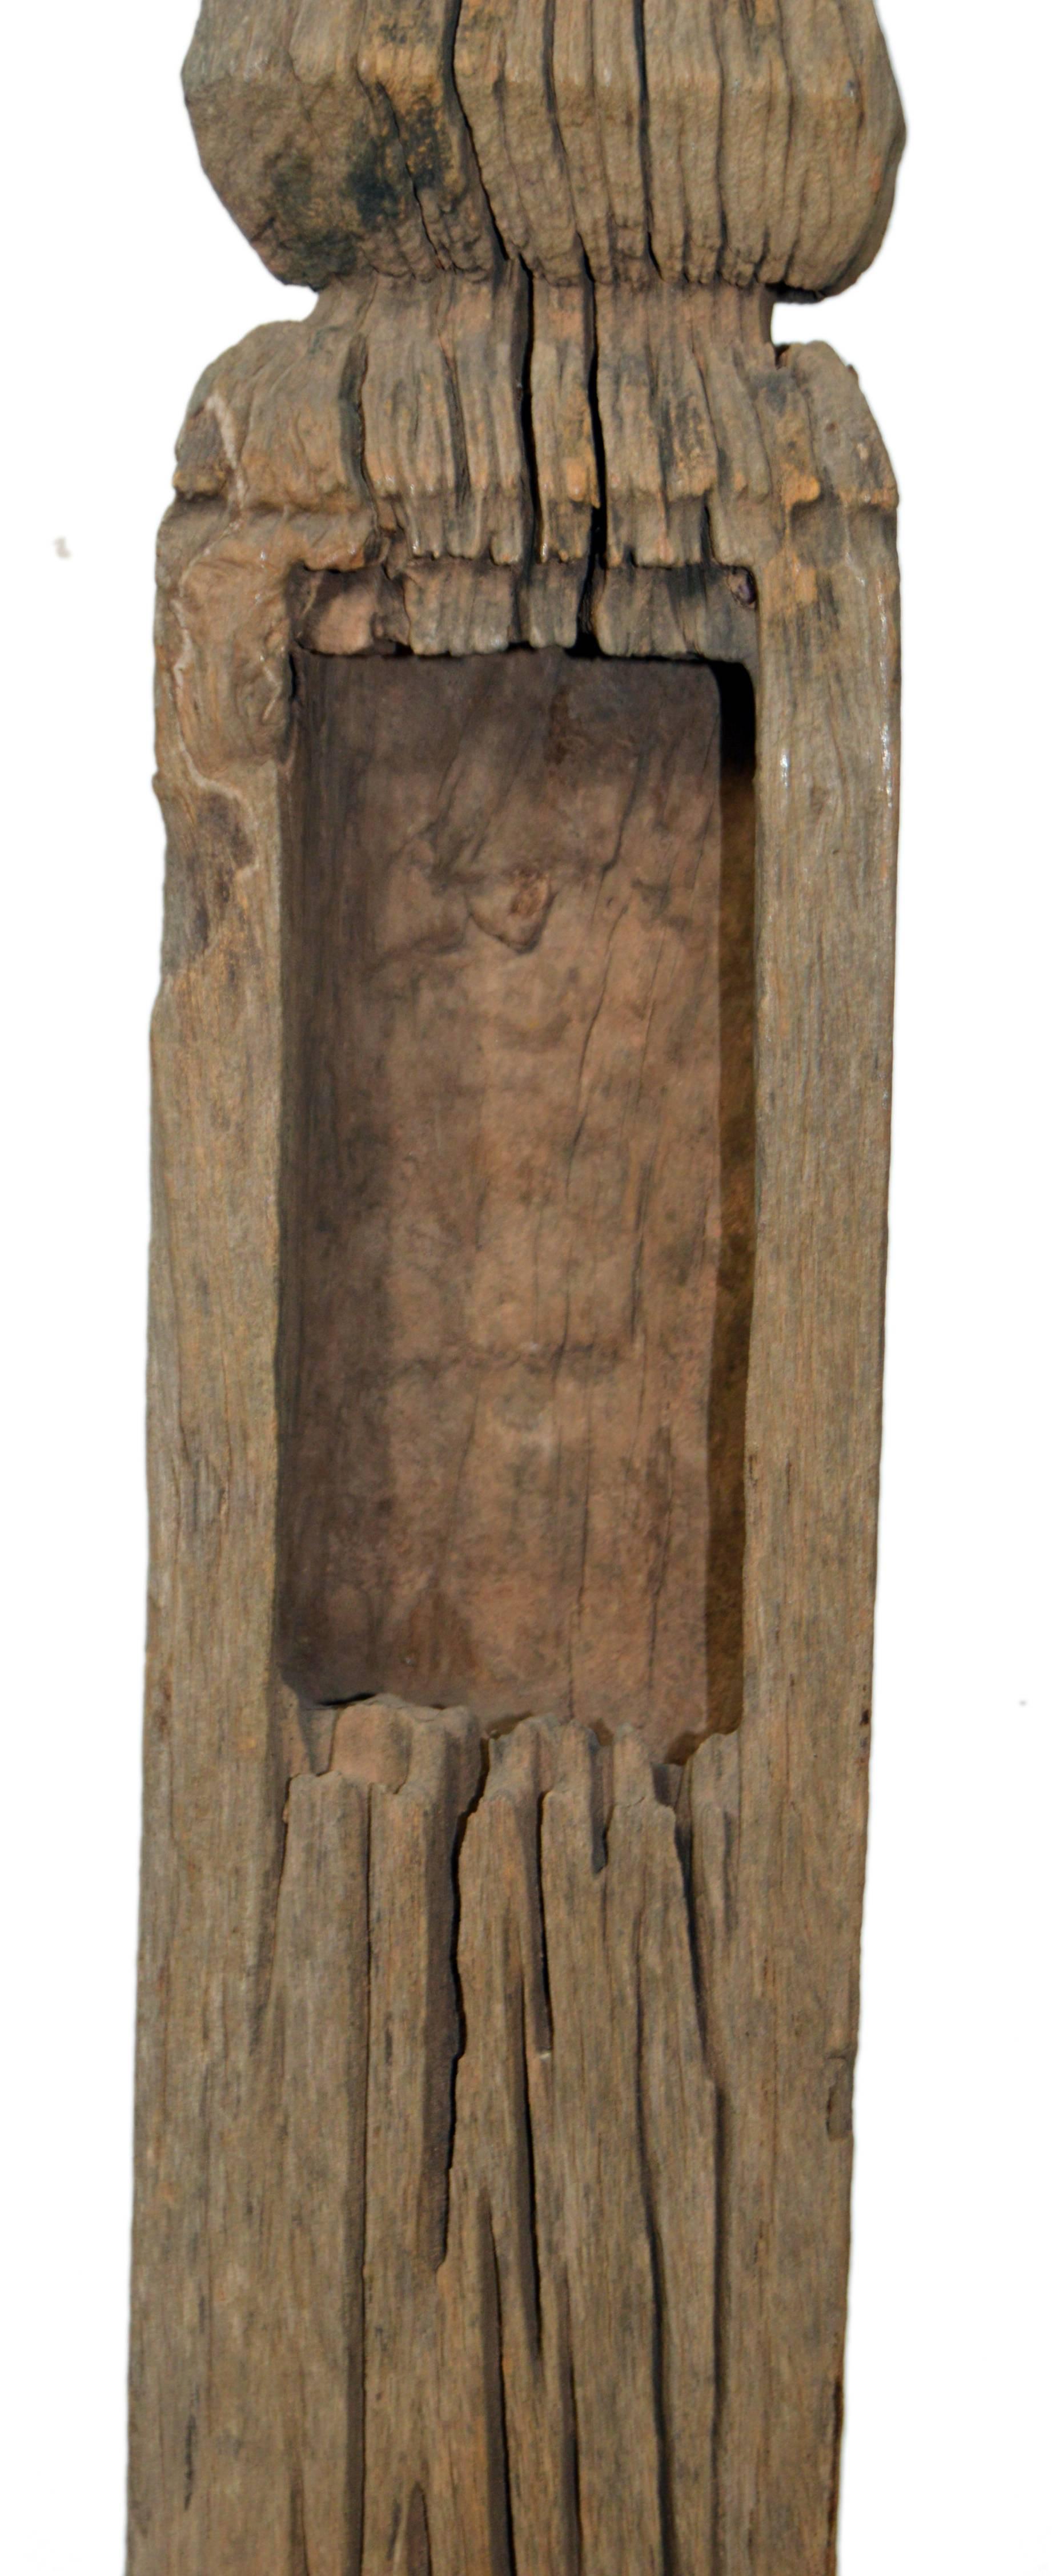 Rustic Thai 19th Century Sculptural Architectural Fragment Possibly from a Spirit House